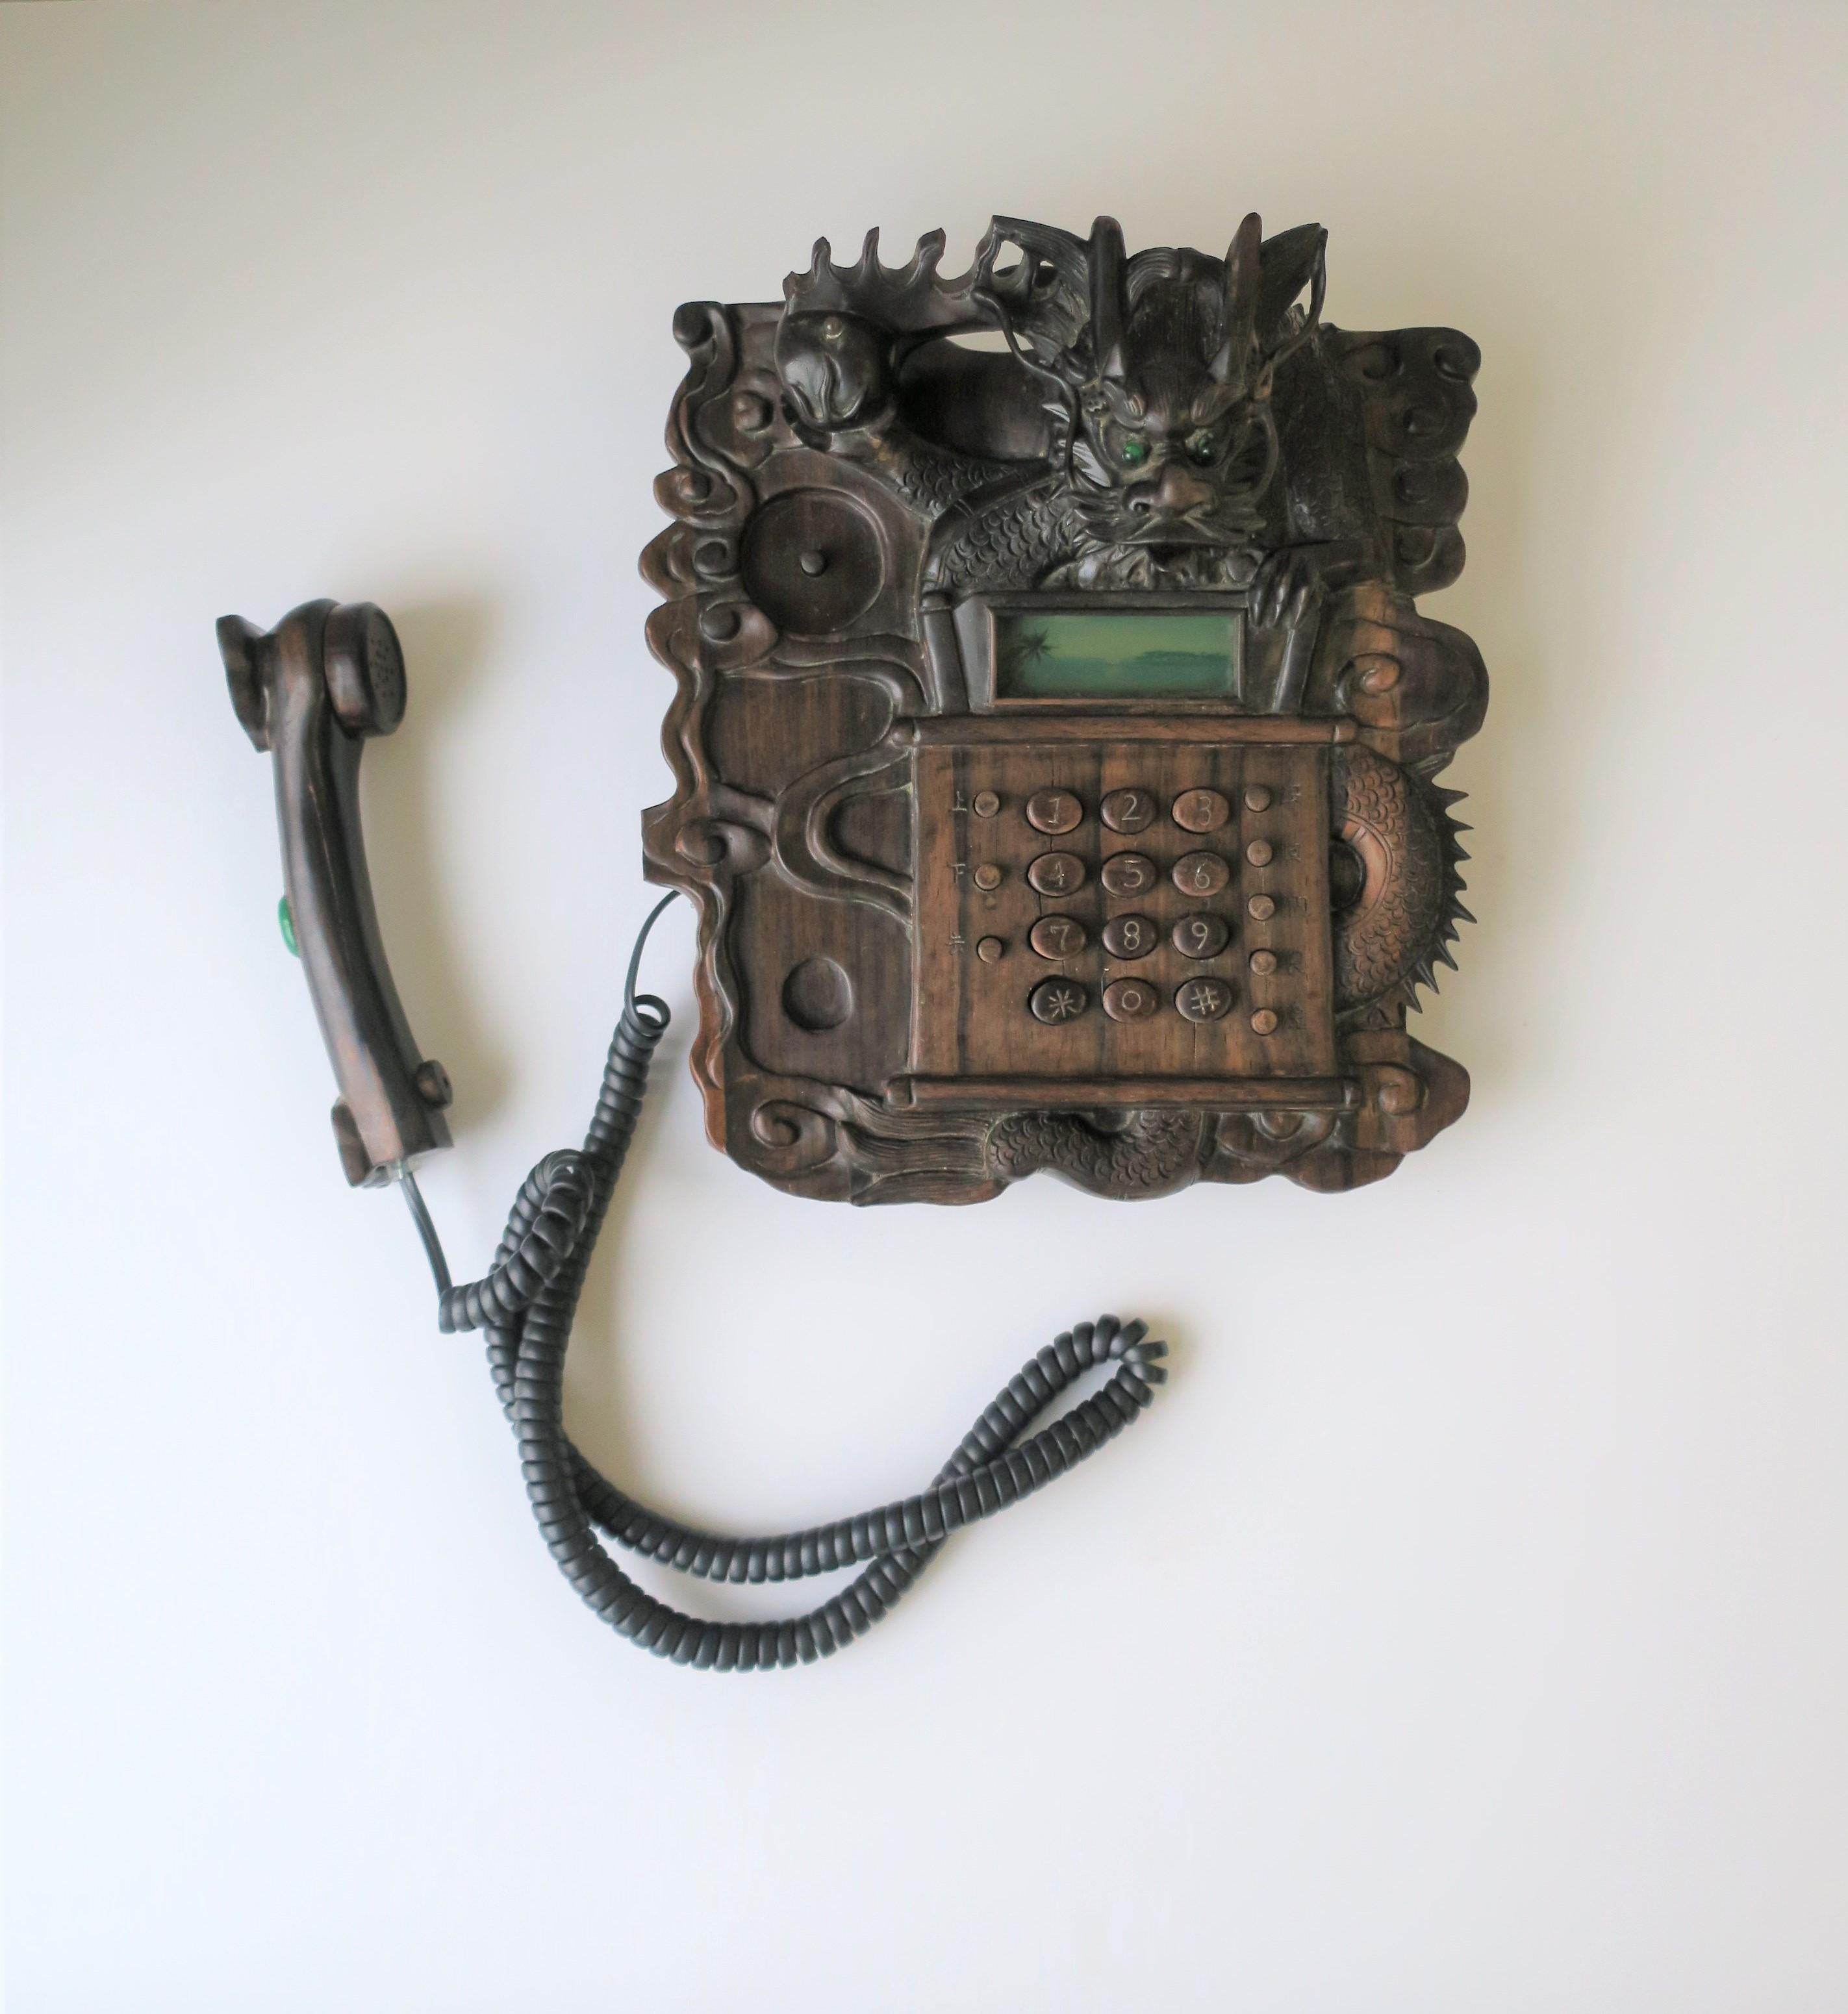 A very beautiful, rare, and exotic Chinese dragon landline telephone, circa 1980s-1990s. Phone is a hard carved wood with all the details of a dragon (claws, tongue, horns, tail, etc.) Phone handle has a beautiful oval piece of polished emerald